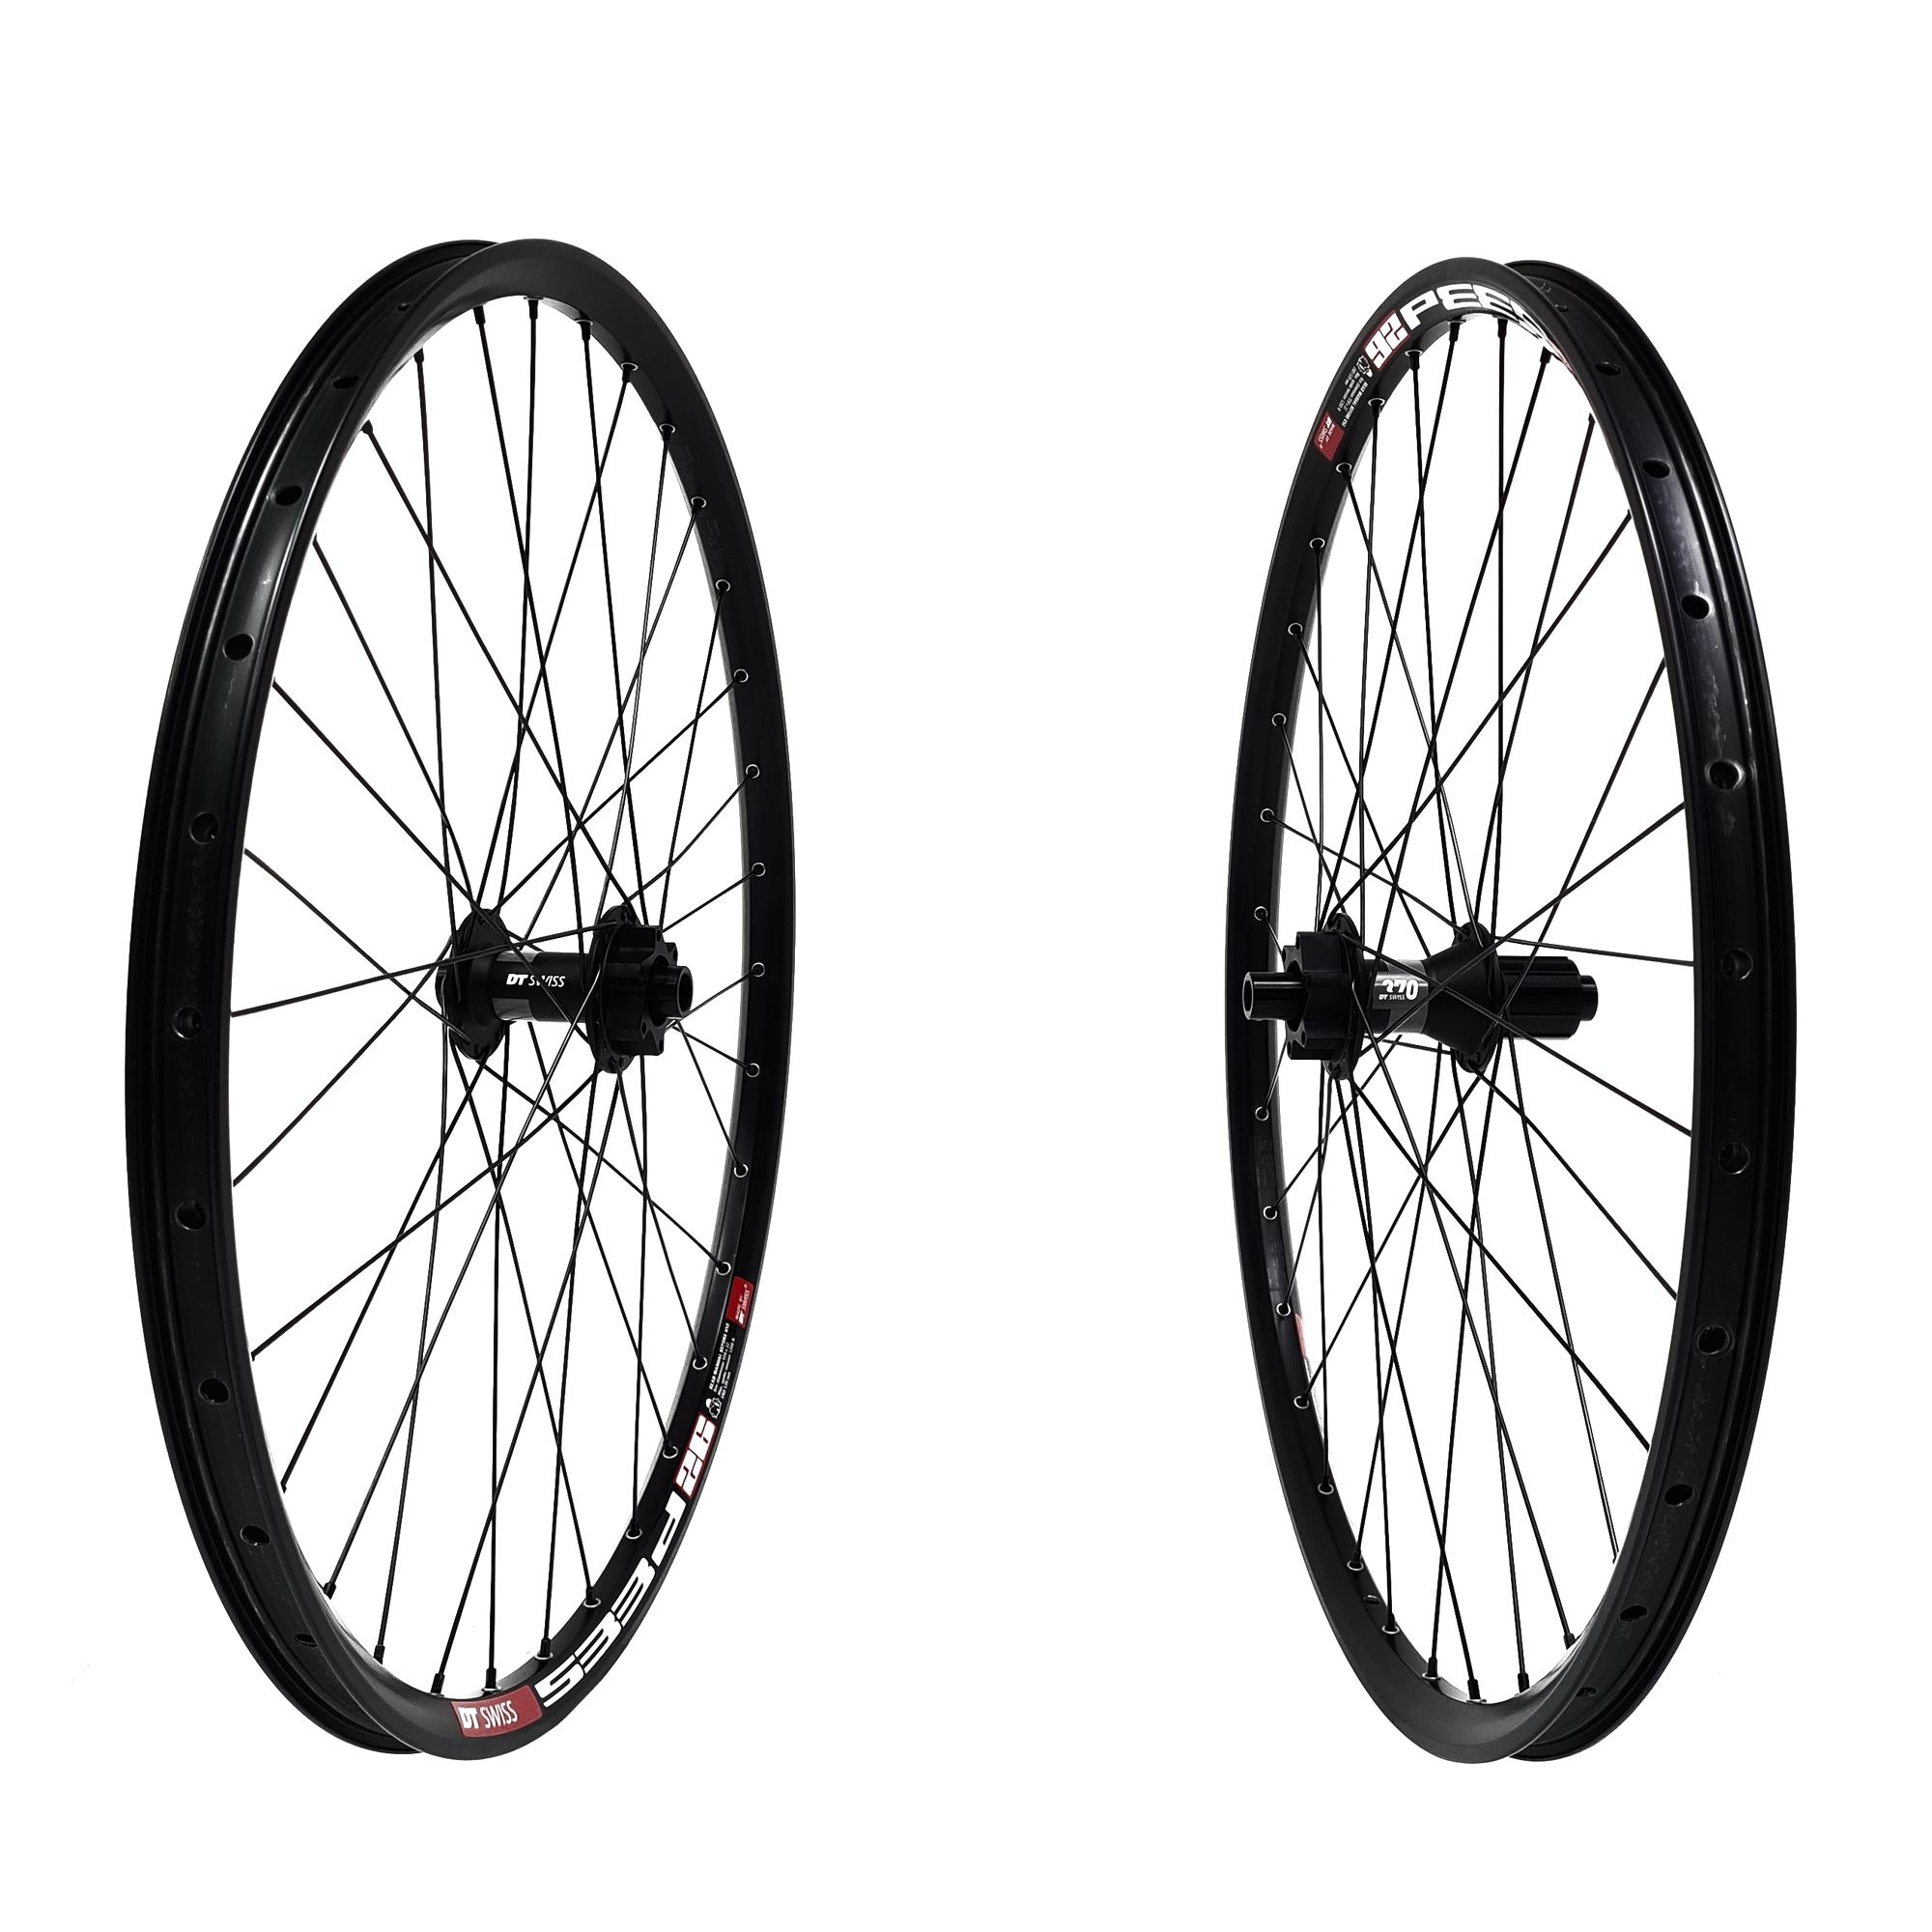 Roues DT Swiss Enduro 370 Straight Pull 533d 26" NEUF 2021 